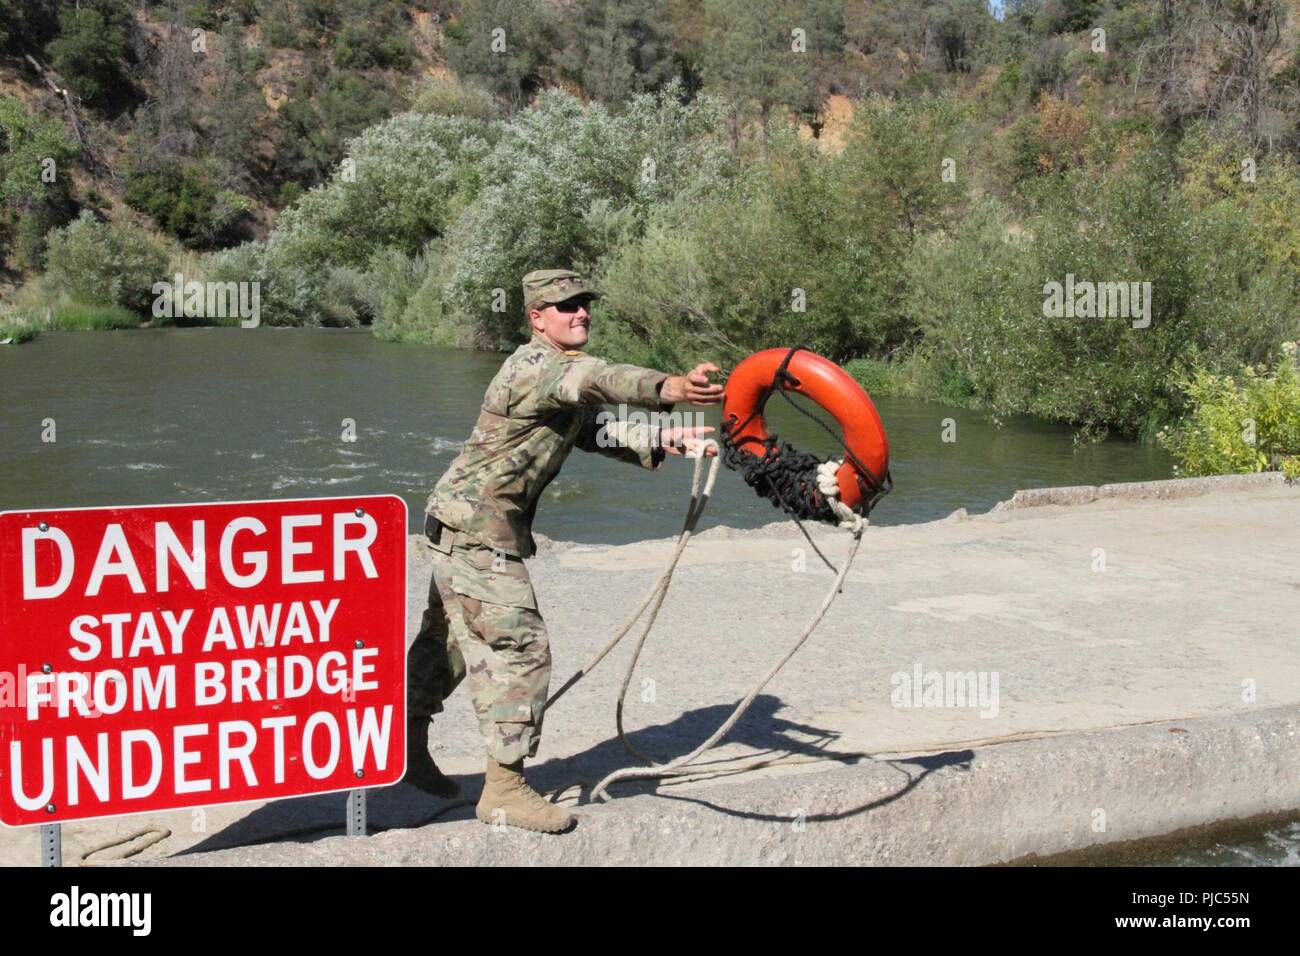 U.S. Army Spc. Christian Berg of the 132nd Multirole Bridge Company, 579th Engineer Battalion, 49th Military Police Brigade, California Army National Guard, tosses a floatation device to a teammate July 13 as members of the 132nd secure a temporary floating bridge at Cache Creek Regional Park, California. The Guardsmen built the bridge so California Department of Forestry and Fire Protection (CAL FIRE) personnel and vehicles have quicker access to fighting wildfires. Stock Photo